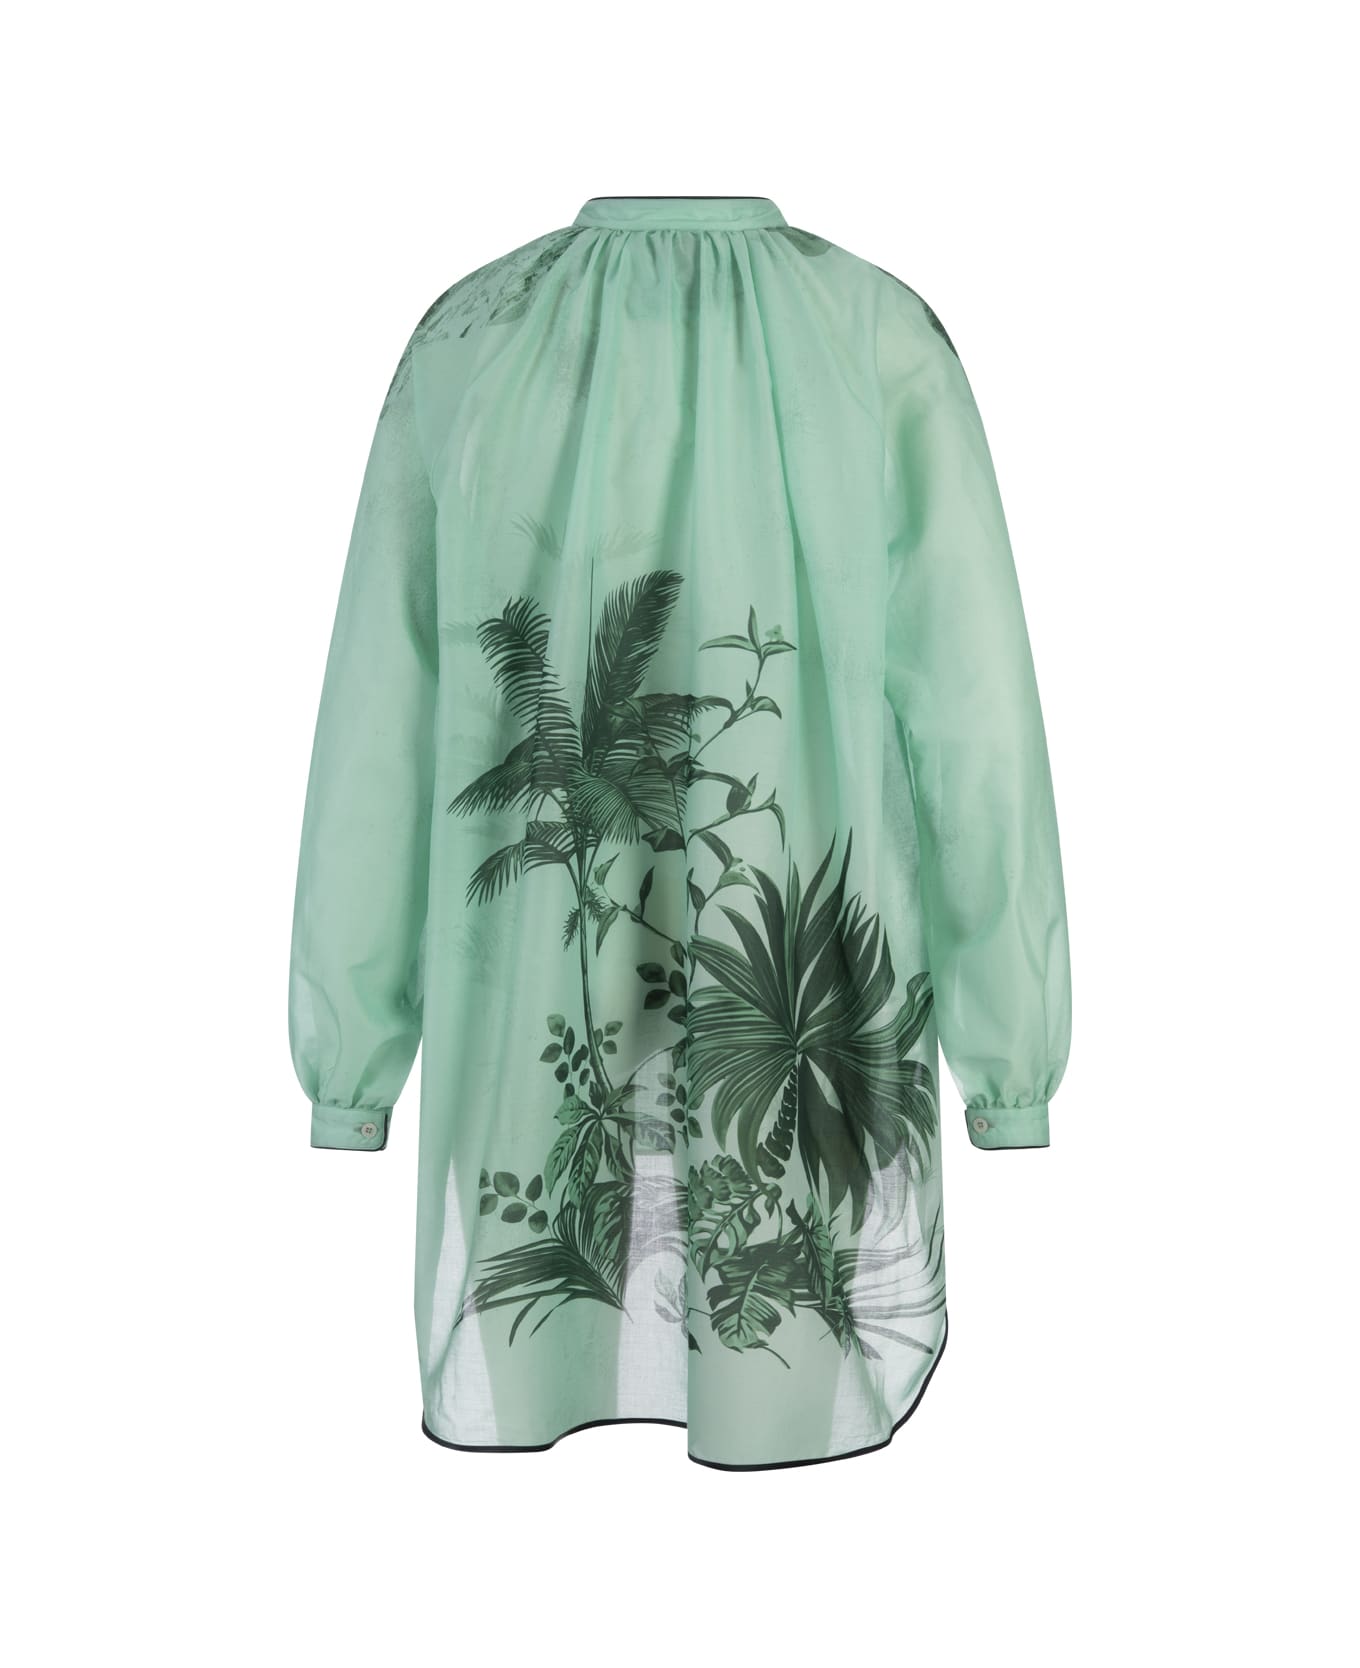 For Restless Sleepers Flowers Green Tizio Shirt - Green ブラウス